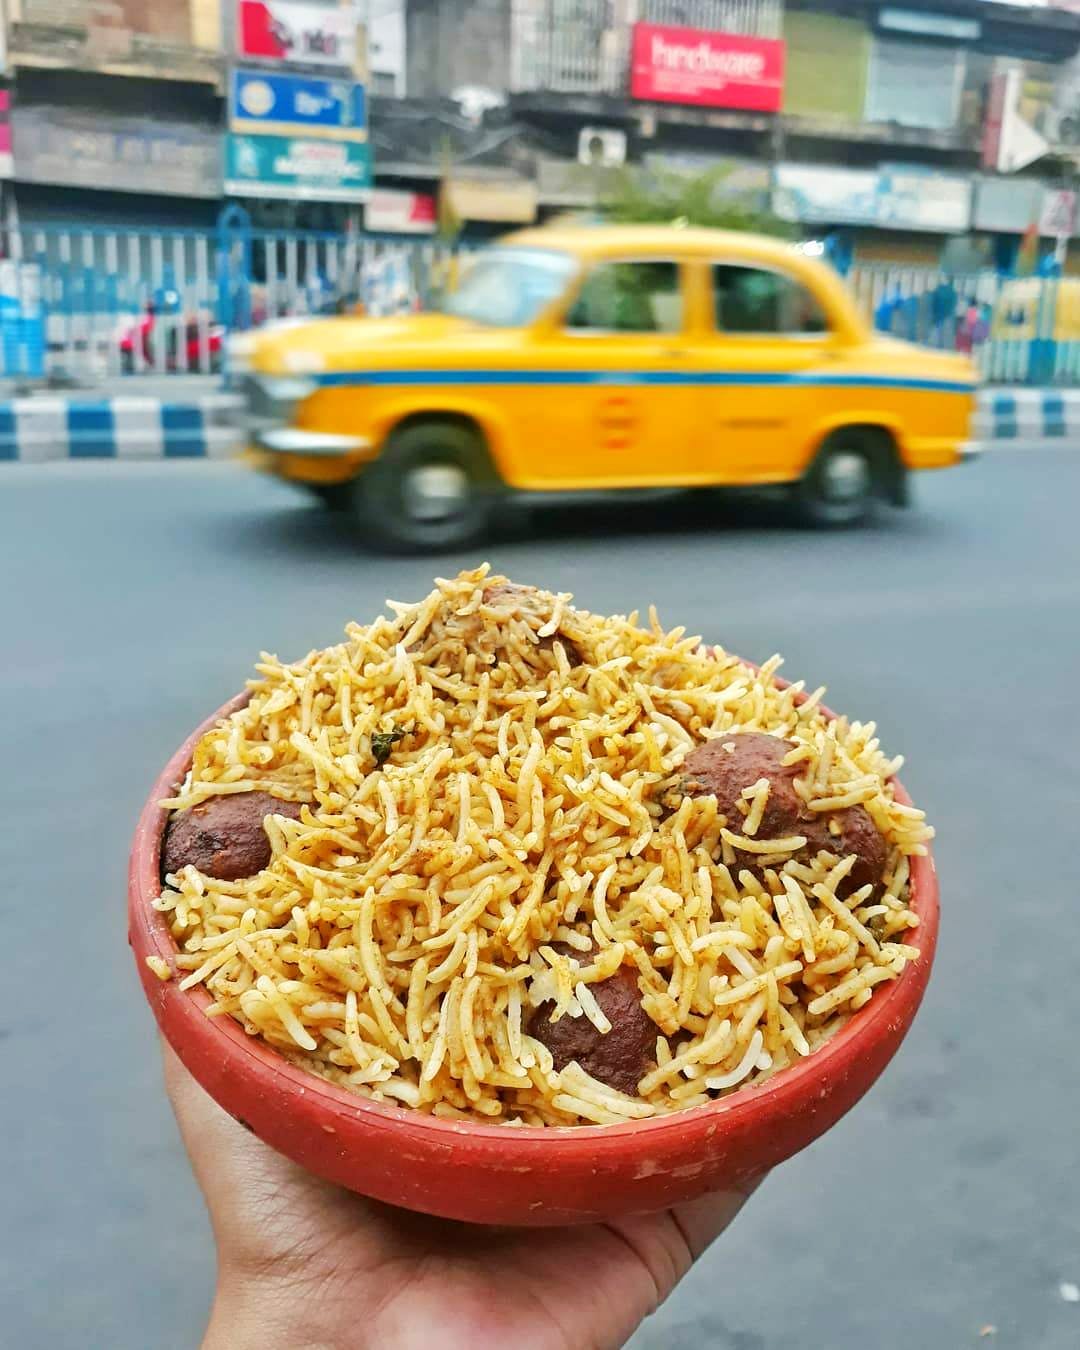 Yellow,Food,Dish,Vehicle,Cuisine,Snack,Street food,Indian cuisine,Bombay mix,American food